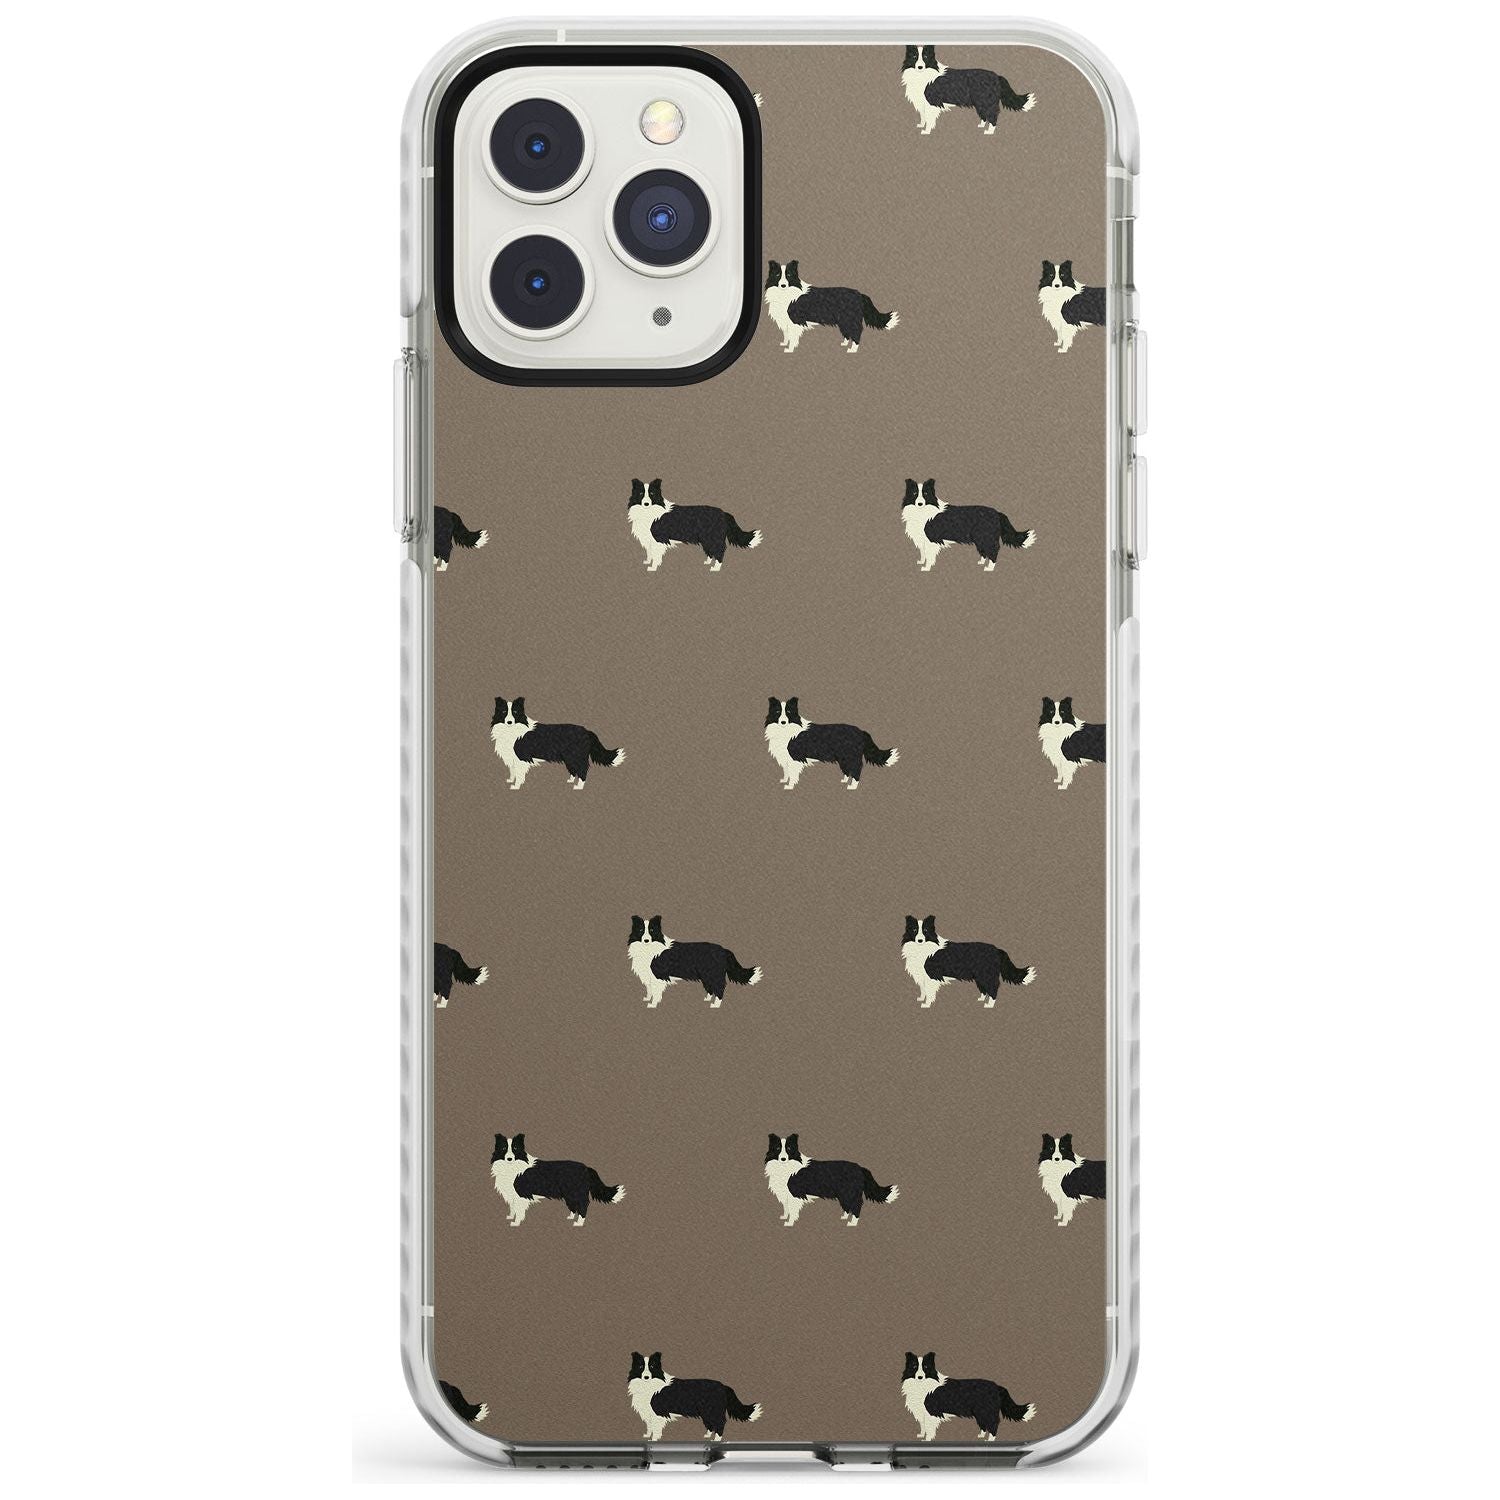 Border Collie Dog Pattern Impact Phone Case for iPhone 11 Pro Max